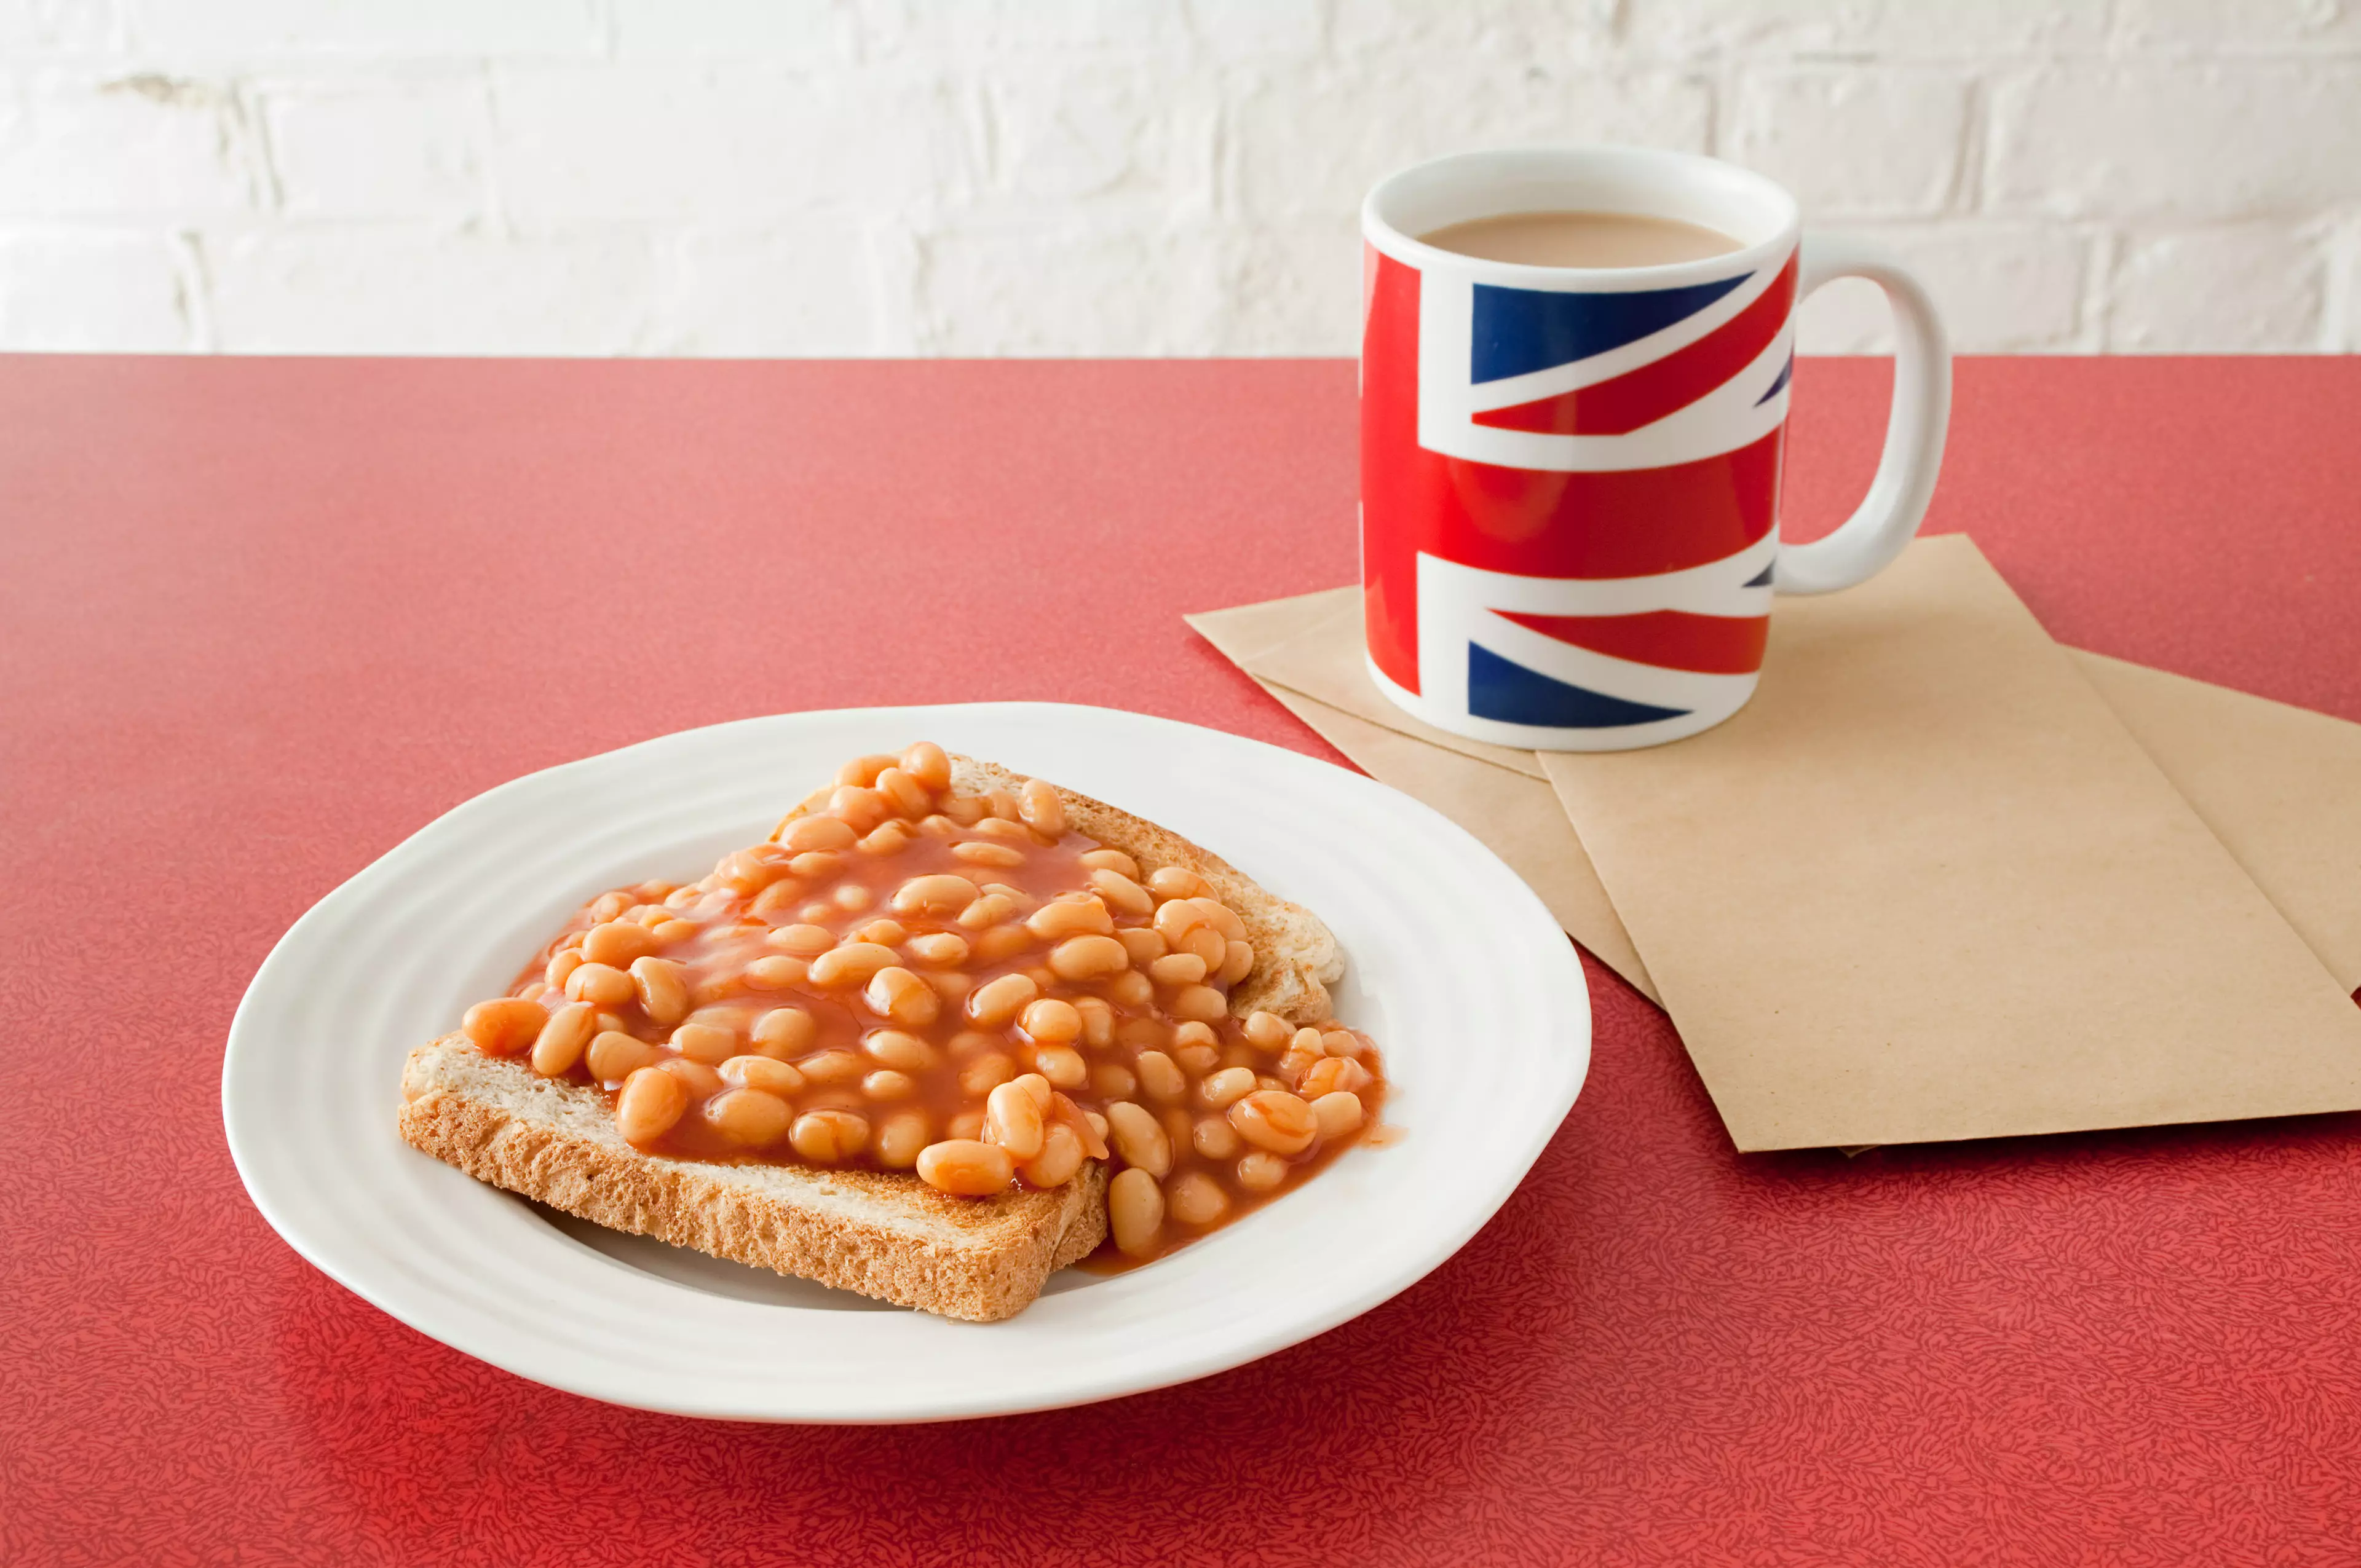 This is how a proper patriot has their beans on toast.